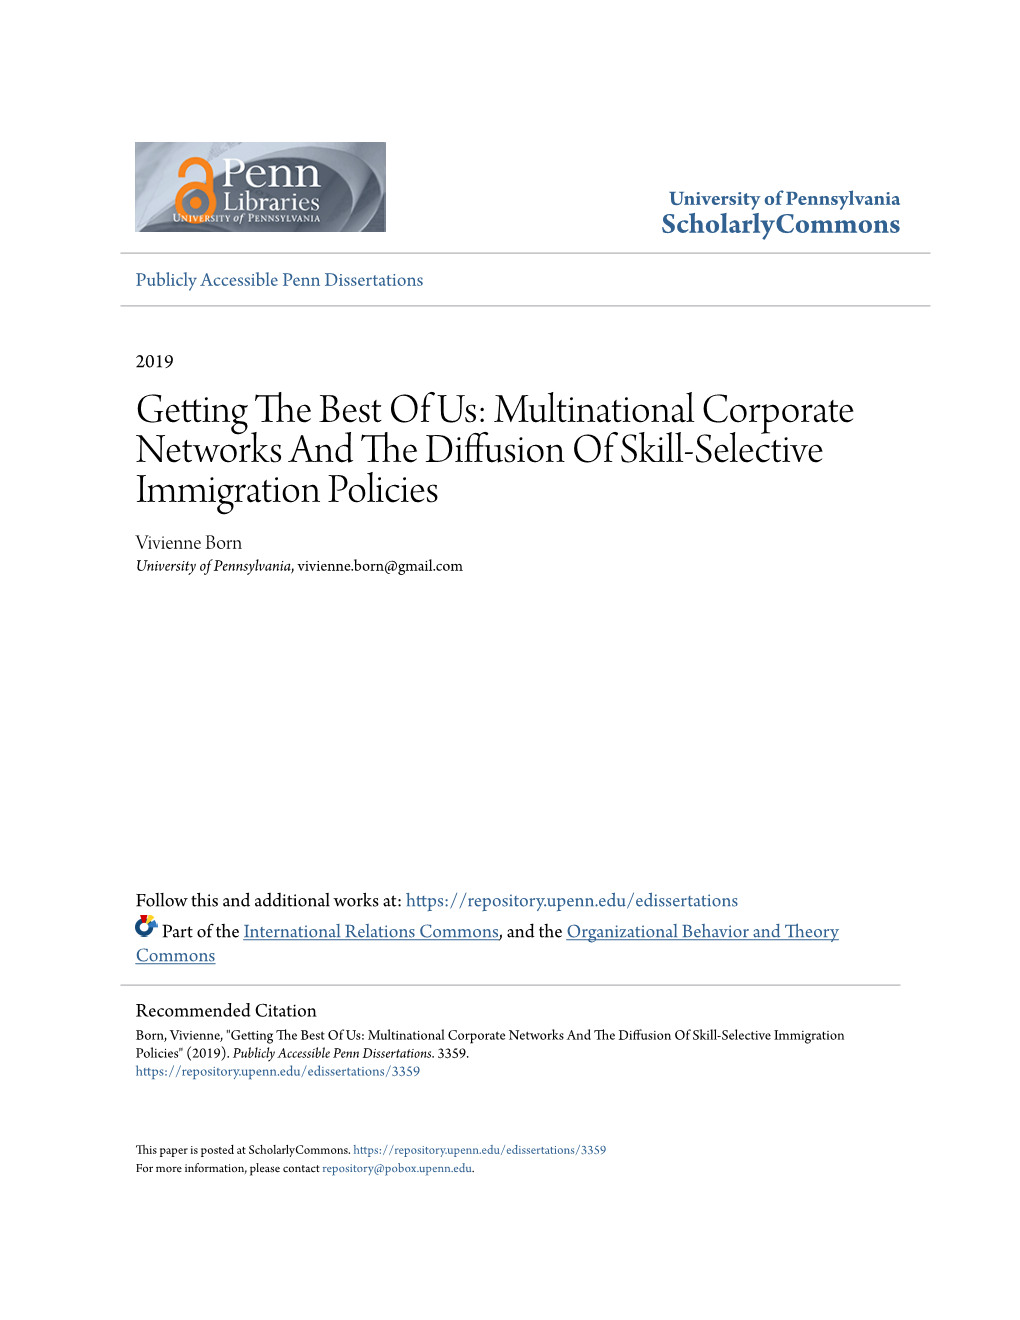 Multinational Corporate Networks and the Diffusion of Skill-Selective Immigration Policies Vivienne Born University of Pennsylvania, Vivienne.Born@Gmail.Com